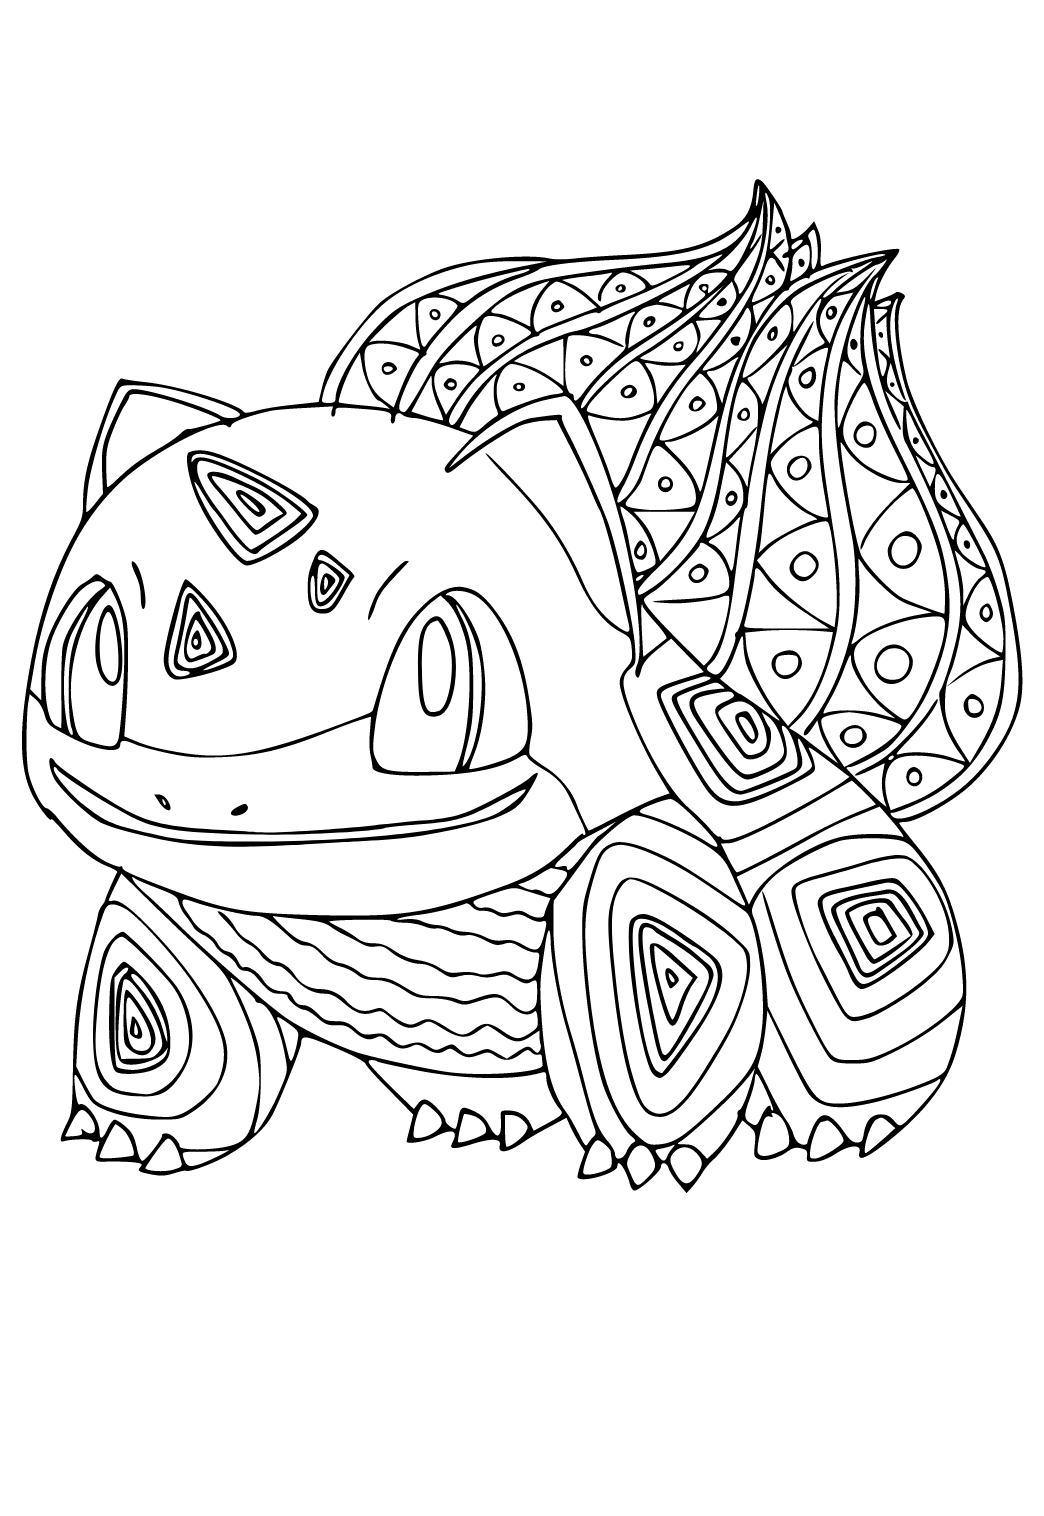 Free printable bulbasaur pattern coloring page for adults and kids